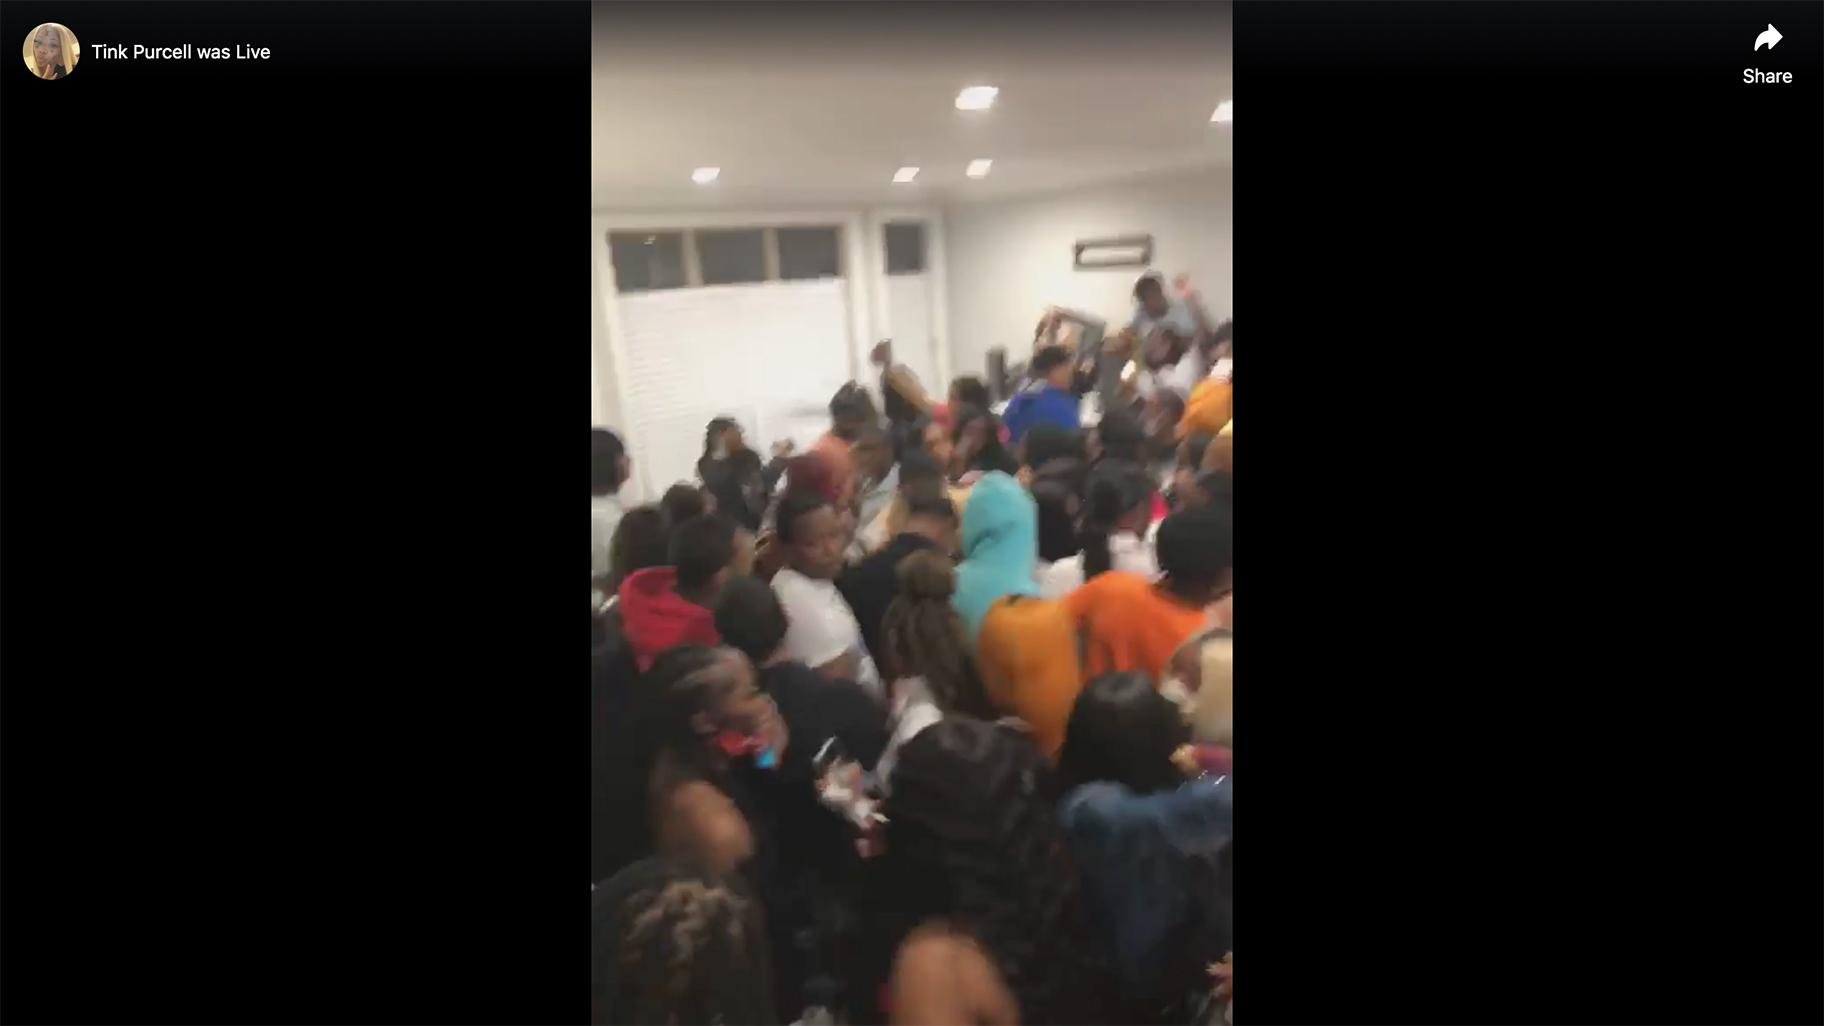 A screenshot taken from a Facebook Live video shows a crowded house party that appears to have been held in Chicago on Saturday, April 25, 2020.